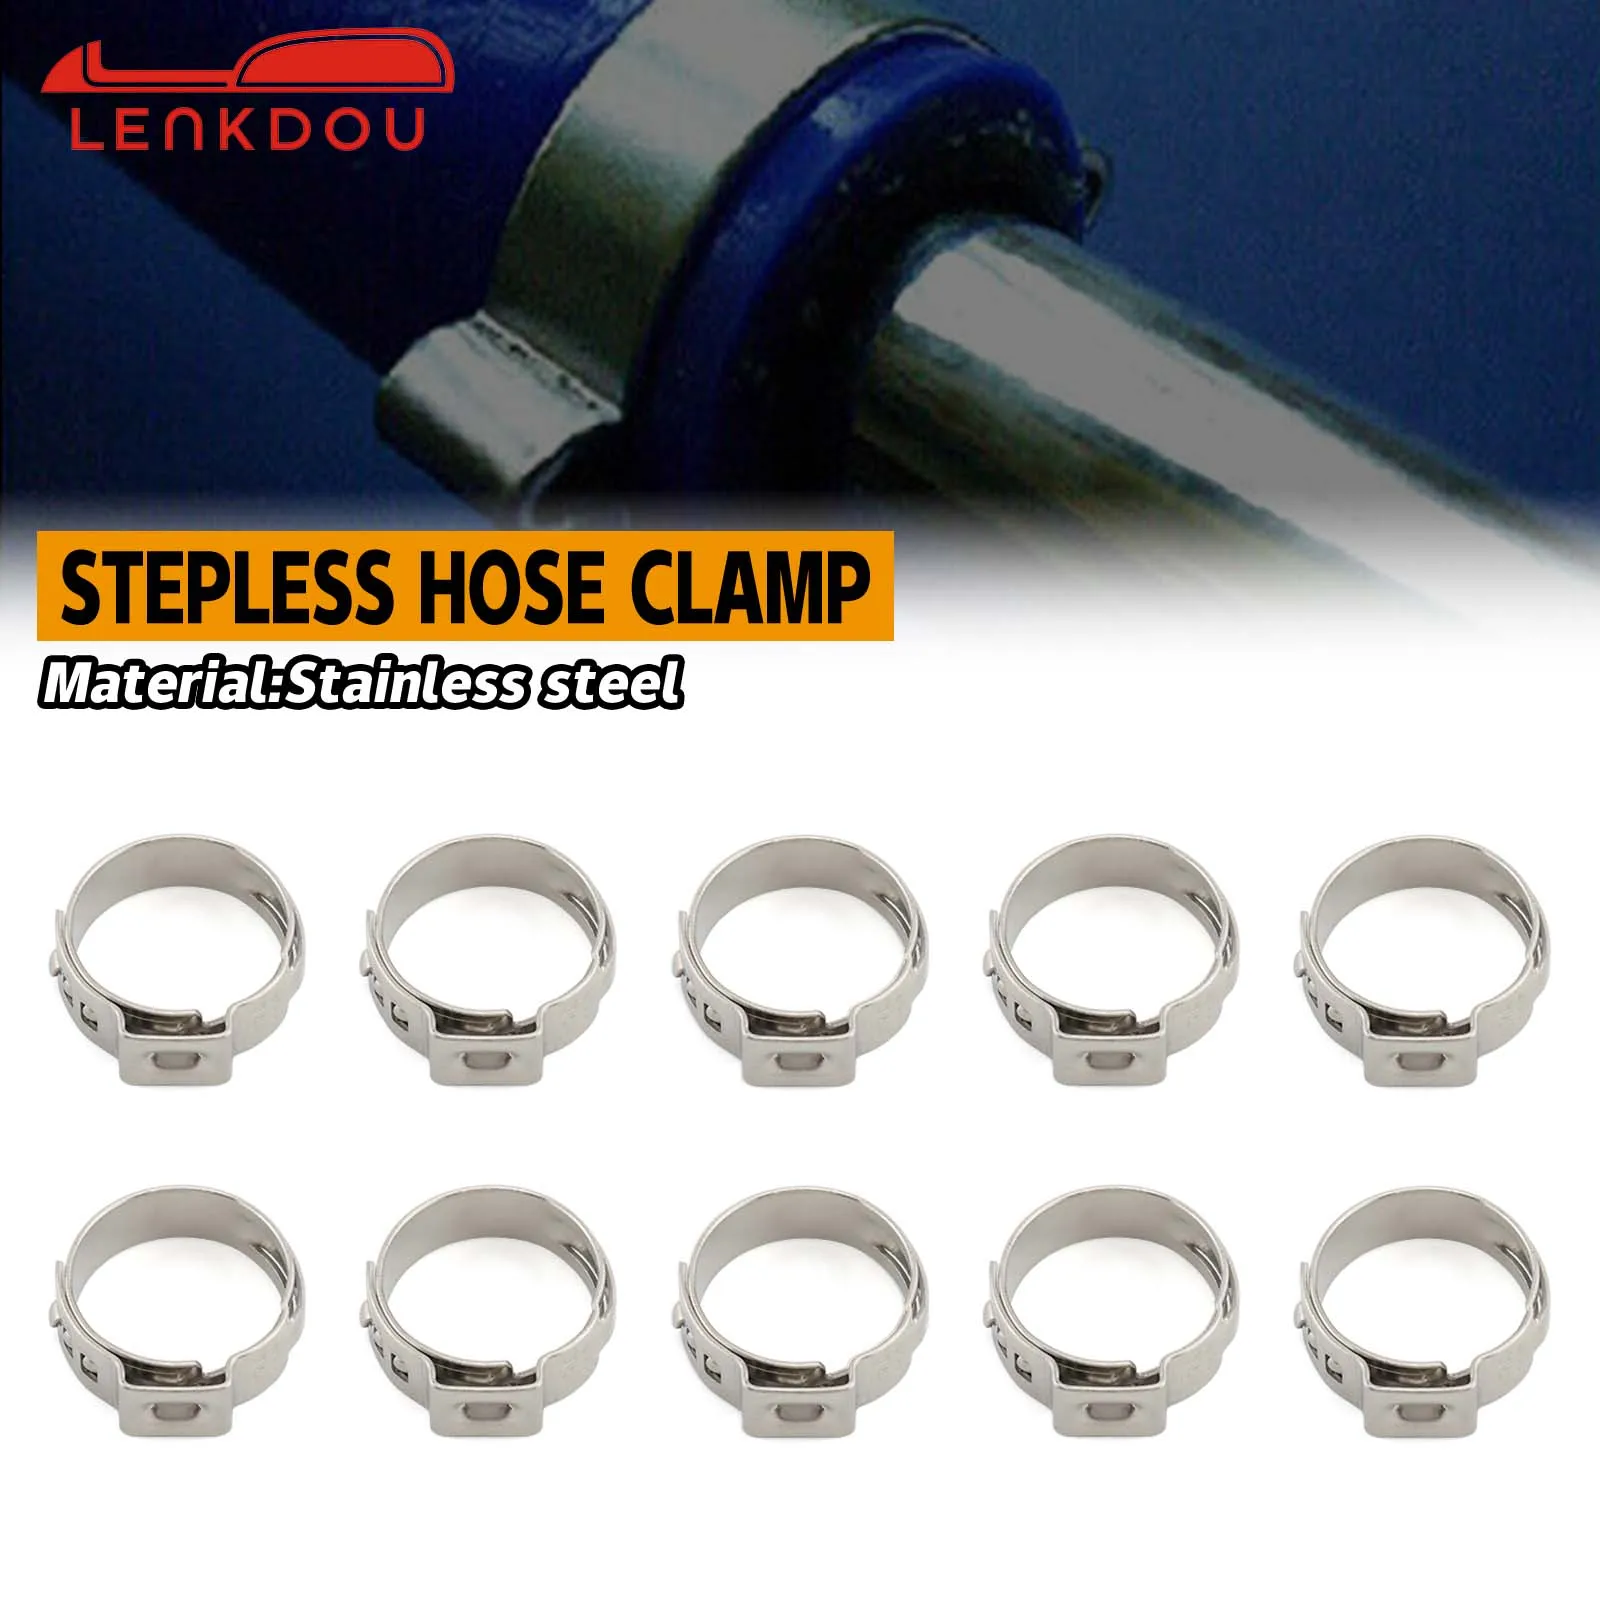 

11/16" ID Stepless Hose Clamp 10-Pack For Harley Motorcycle With Standard 3/8" Stainless Steel Braided /Black Rubber Oil Lines